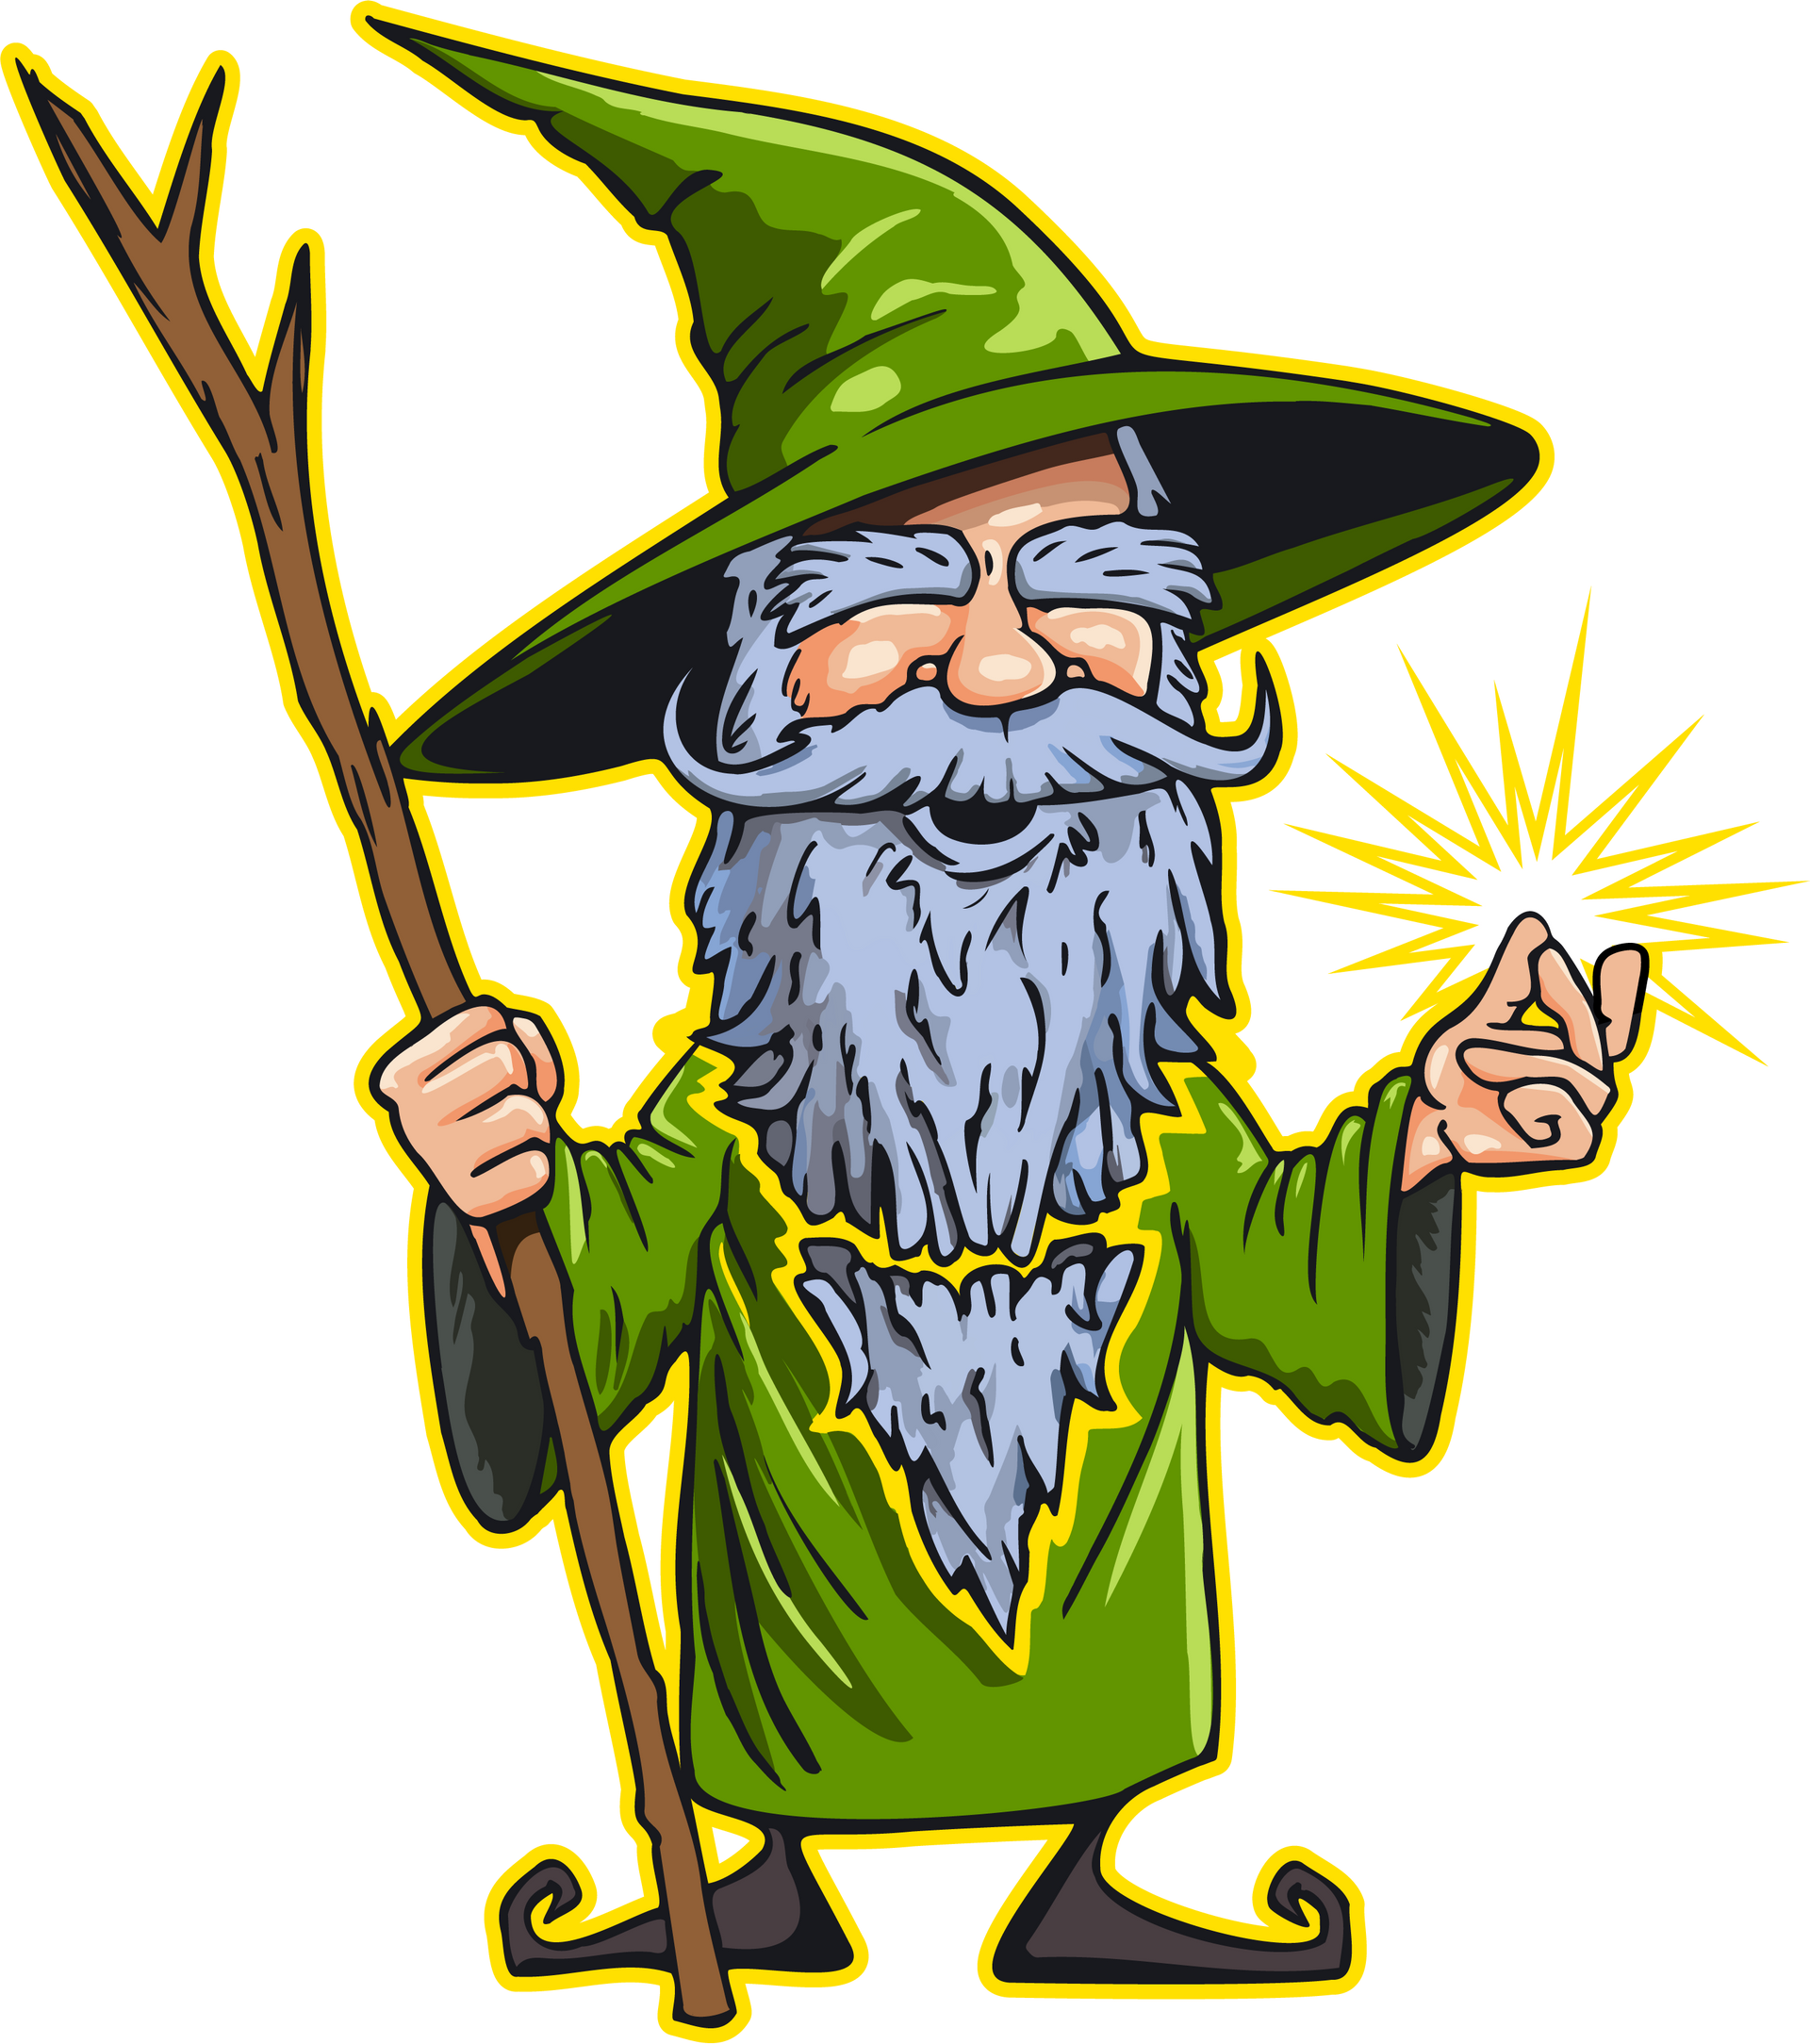 A cartoon wizard with a beard and a green hat is holding a wand.